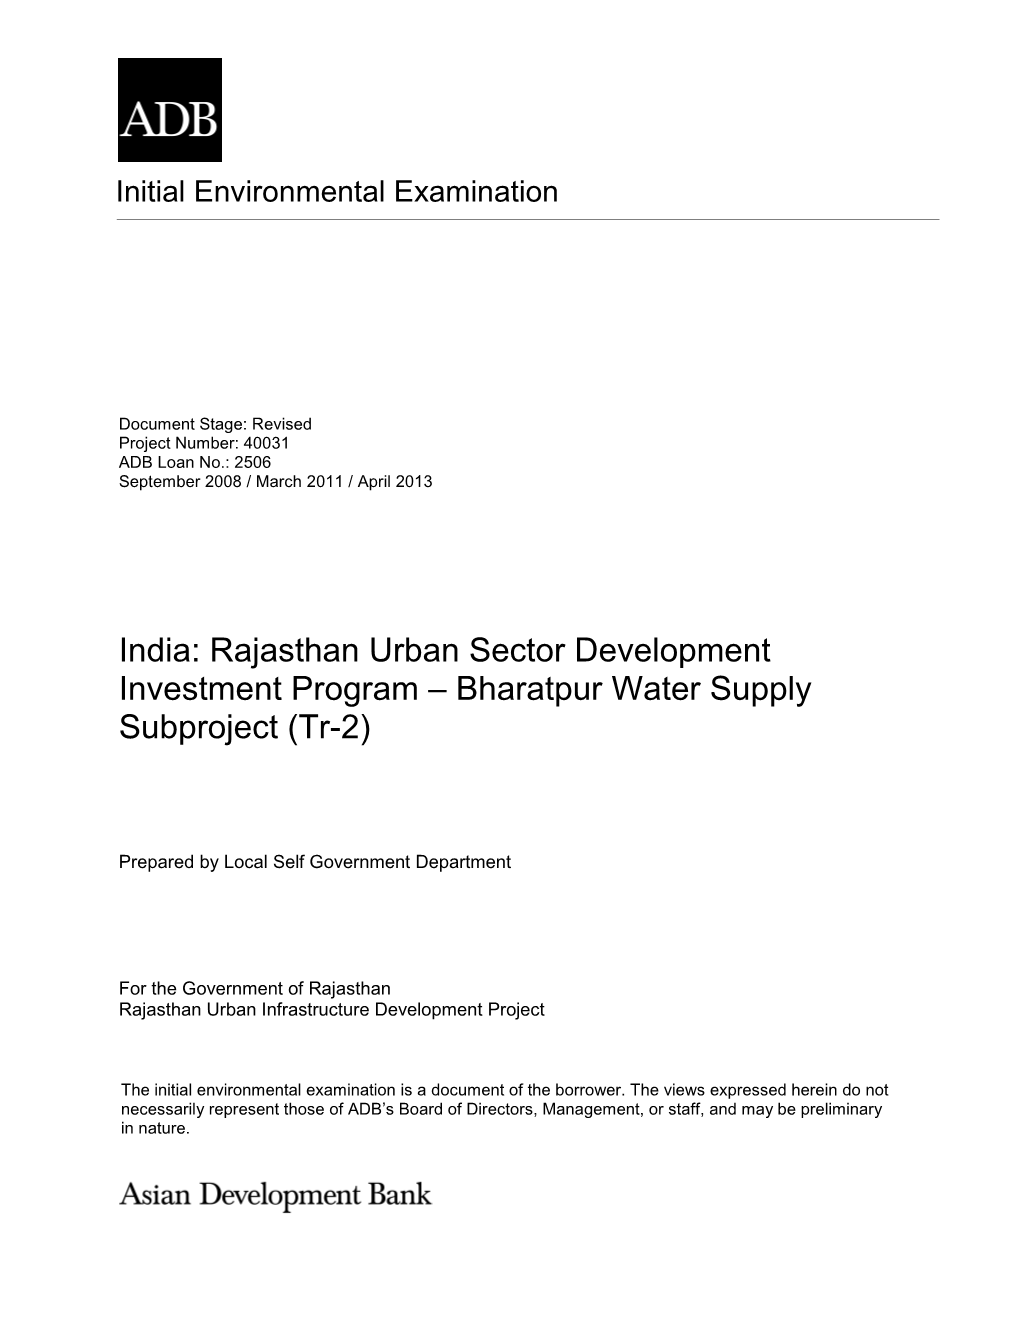 India: Rajasthan Urban Sector Development Investment Program – Bharatpur Water Supply Subproject (Tr-2)